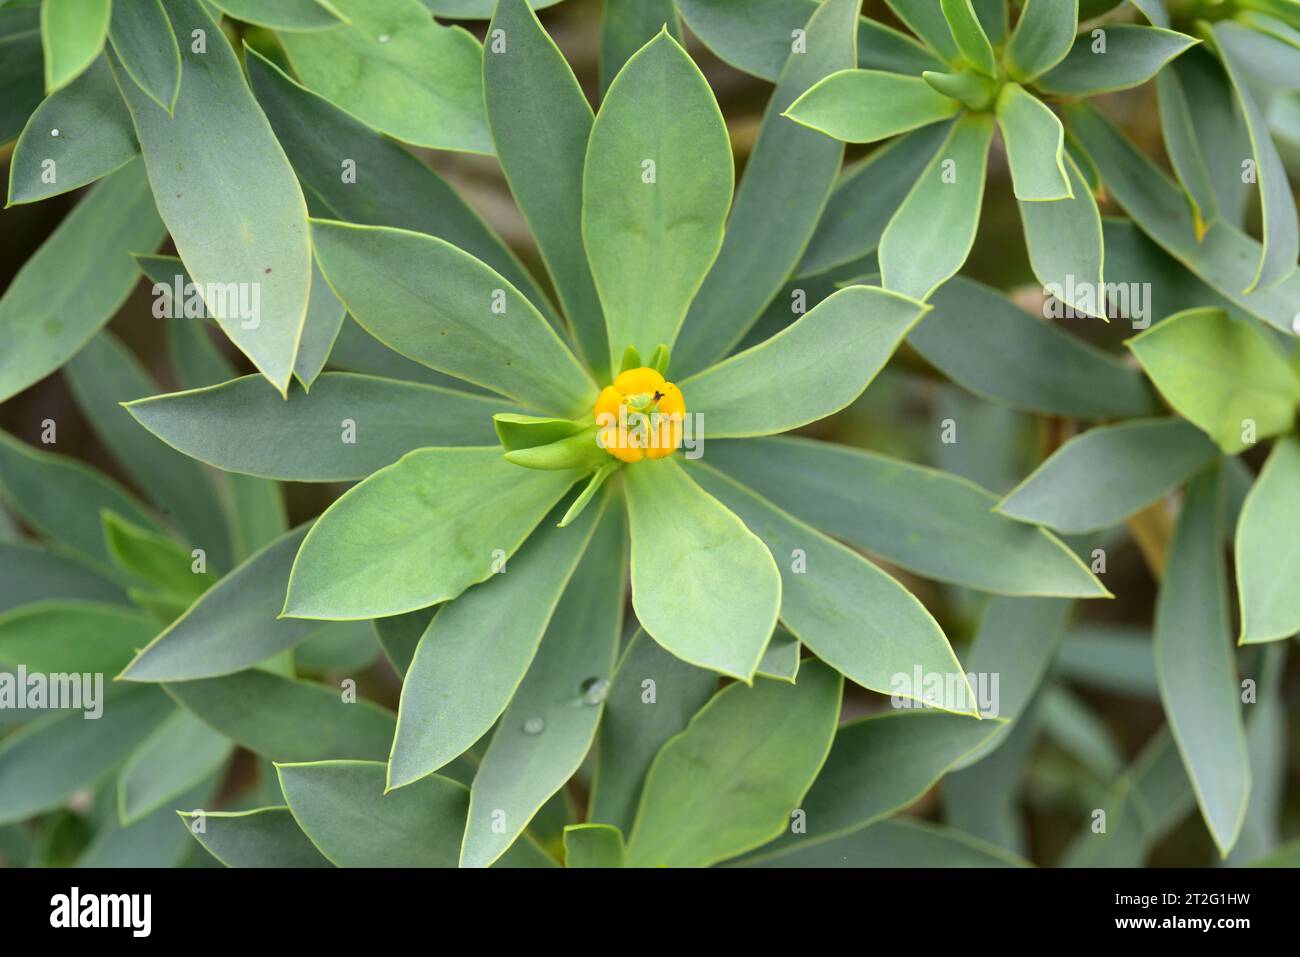 Balsam spurge (Euphorbia balsamifera) is a shrub native to Canary Islands and western Africa. Flower (cyathium) detail. This photo was taken in Lanzar Stock Photo